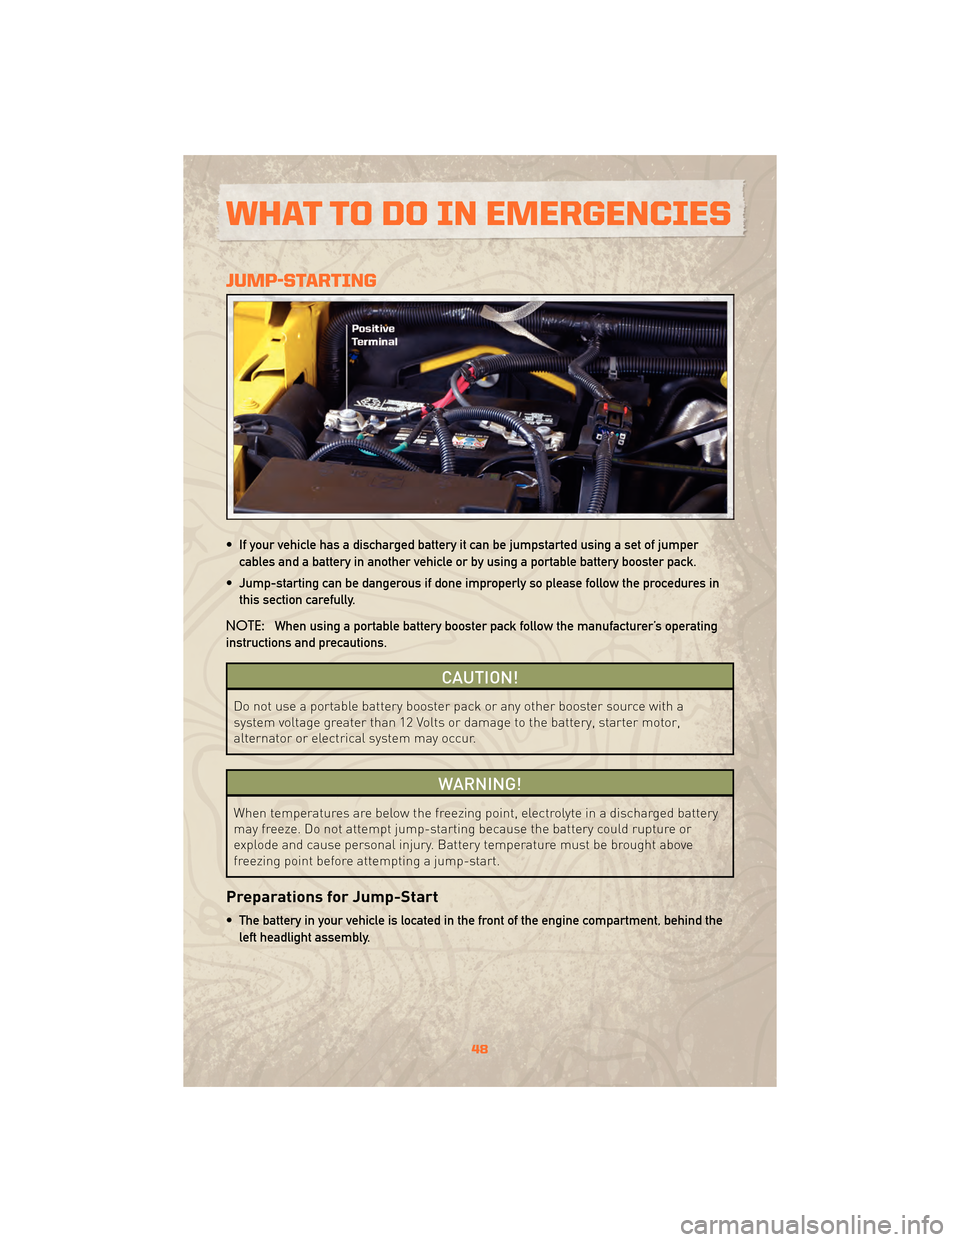 JEEP WRANGLER 2010 JK / 3.G User Guide JUMP-STARTING
• If your vehicle has a discharged battery it can be jumpstarted using a set of jumpercables and a battery in another vehicle or by using a portable battery booster pack.
• Jump-star